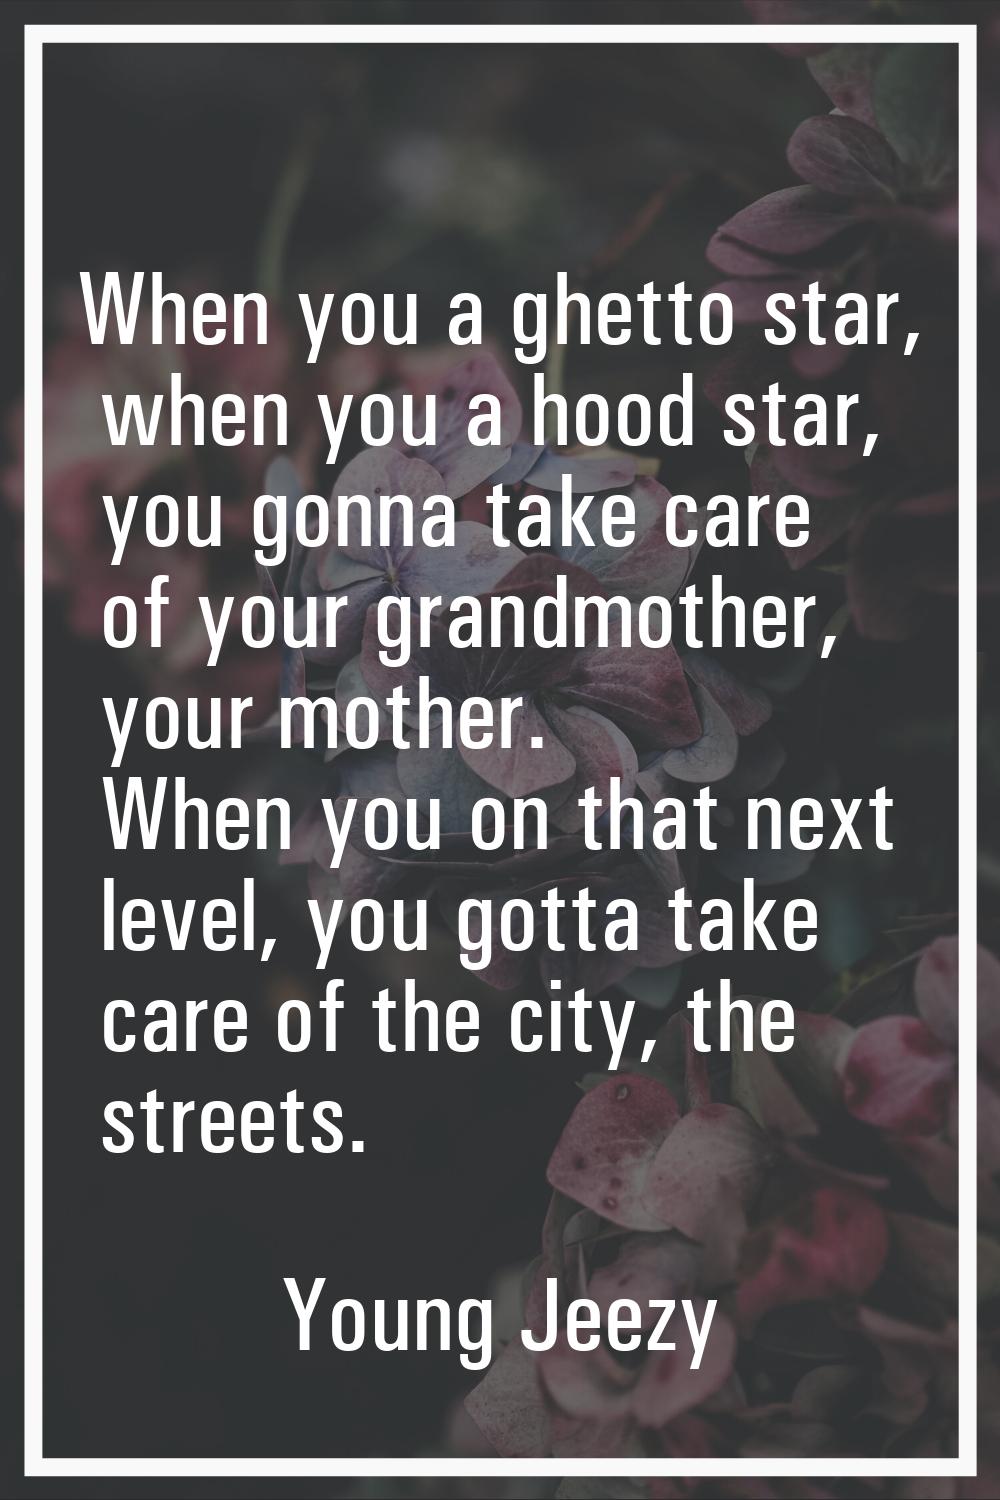 When you a ghetto star, when you a hood star, you gonna take care of your grandmother, your mother.